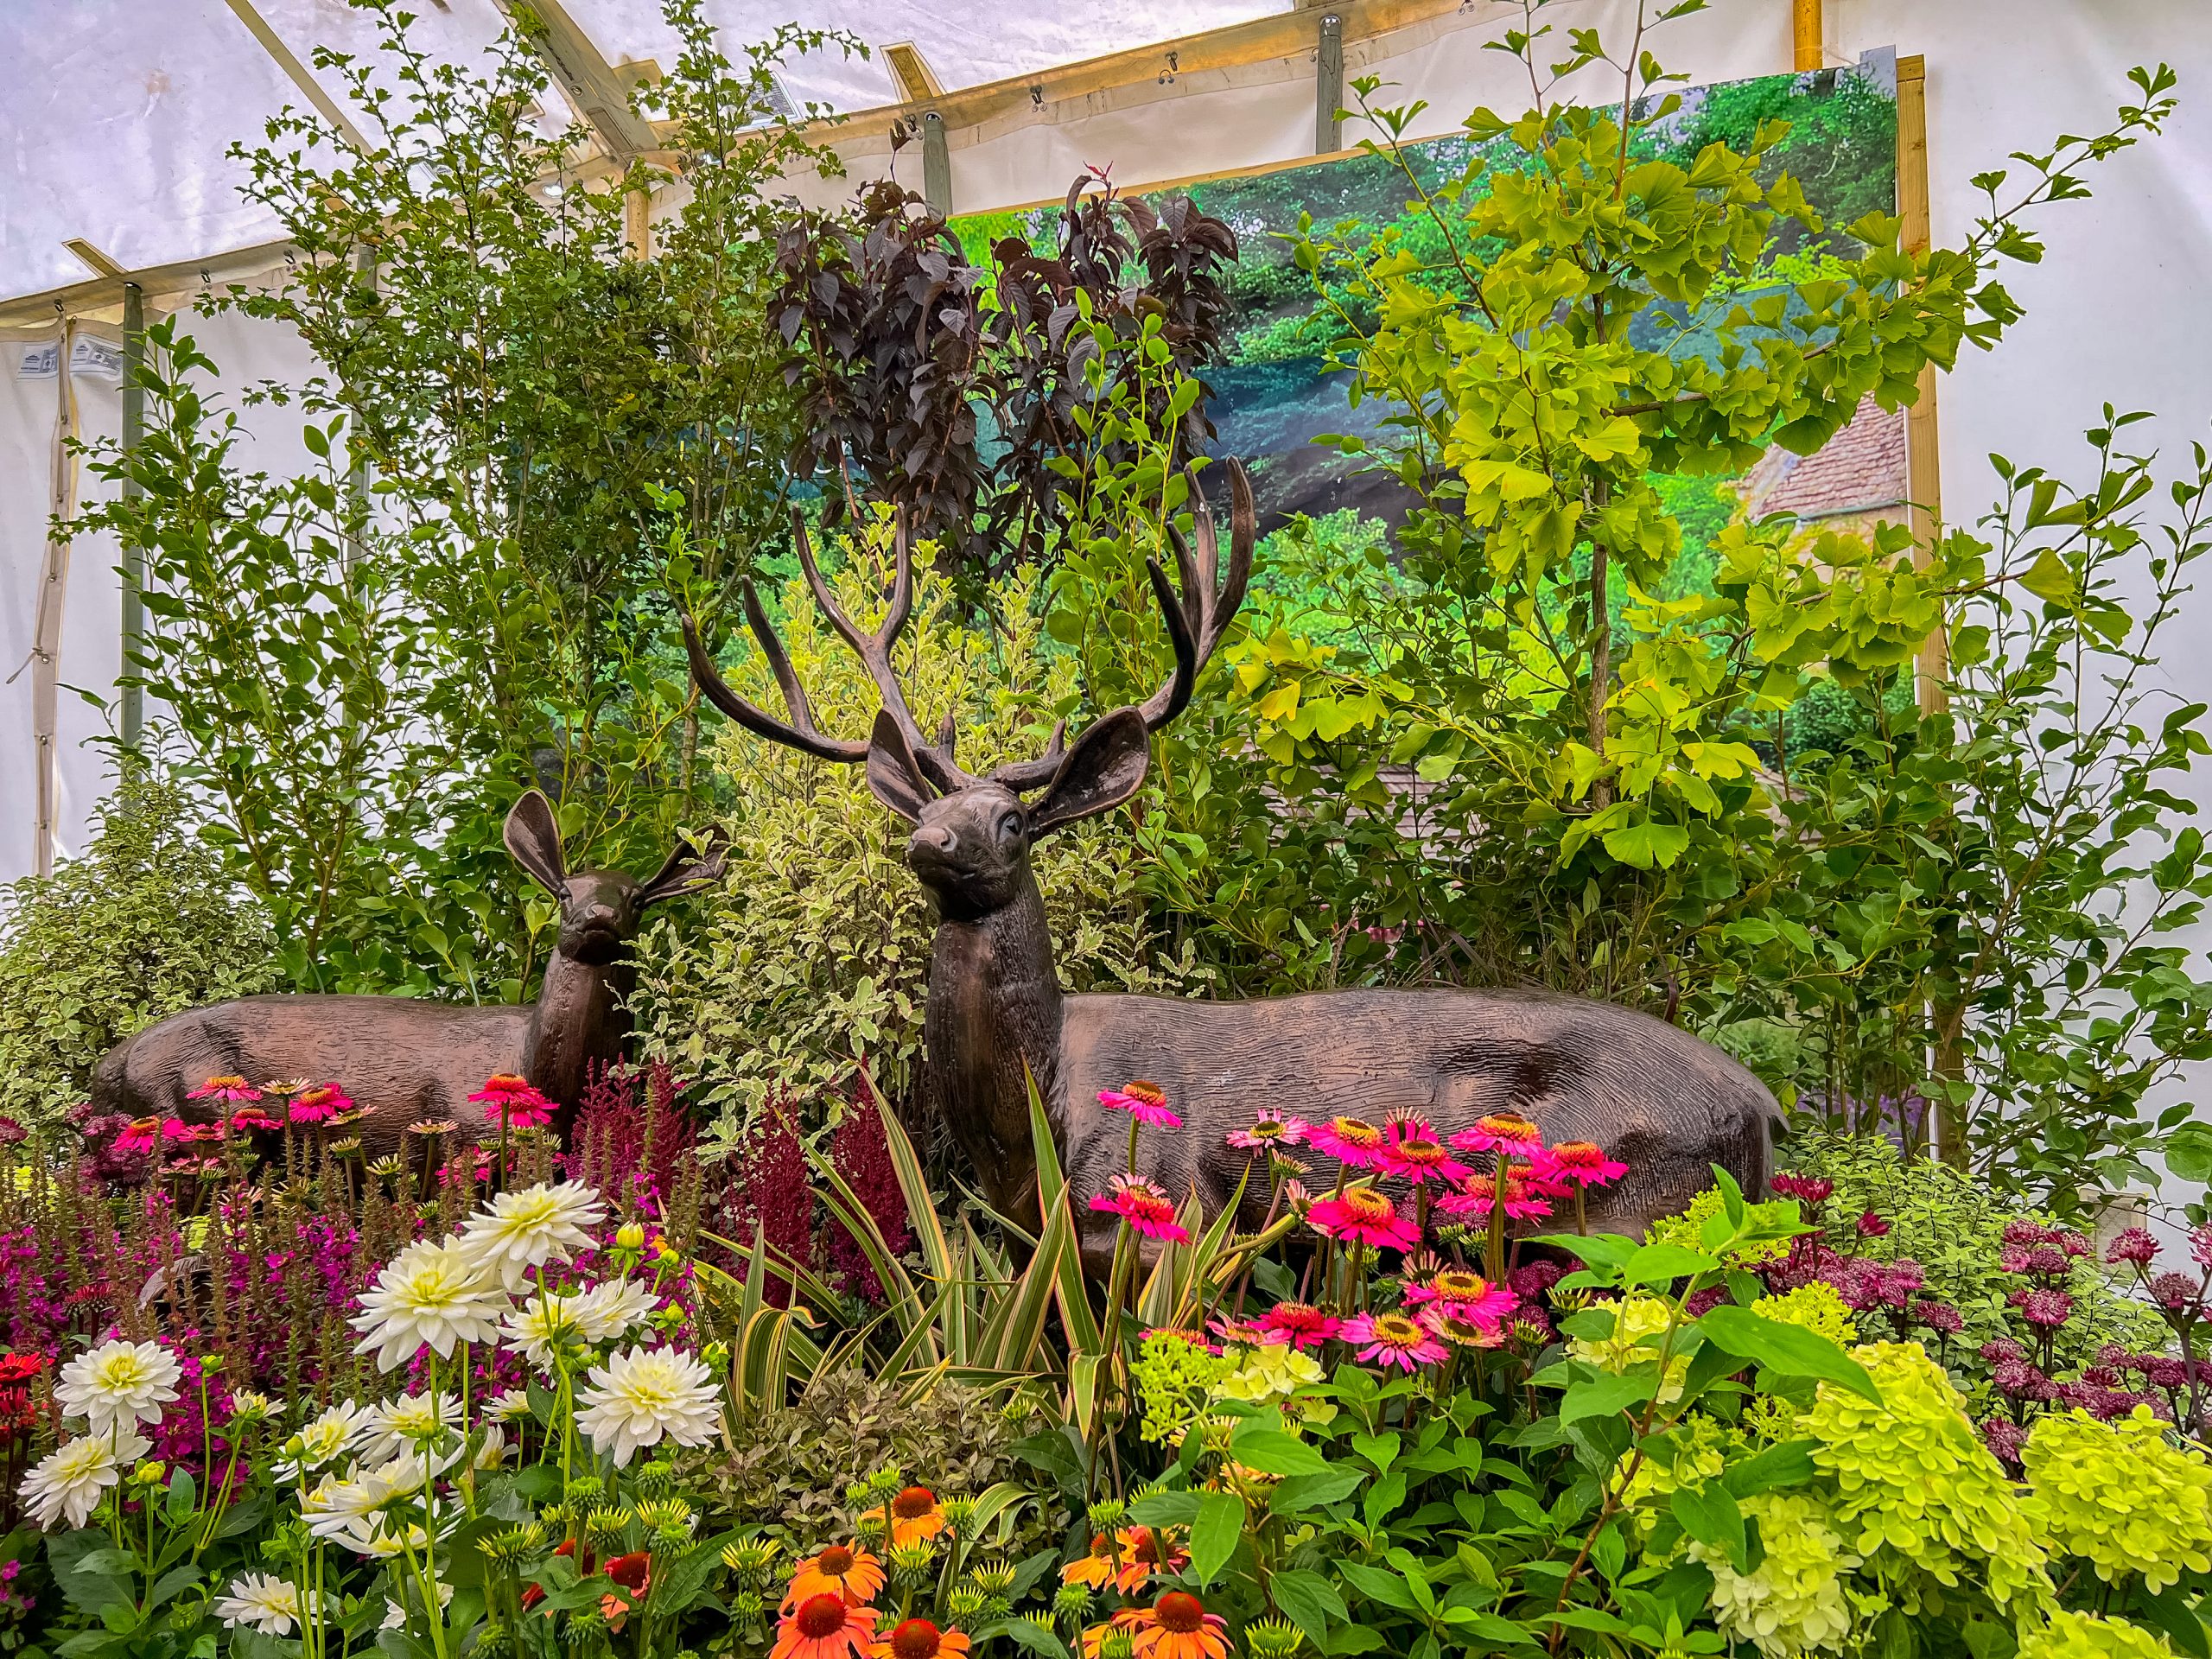 Display in the Floral Marquee. One stag and one deer statue amongst green & deep red tall shrubs and surrounded at the front by orange, pink, red and white flowers as well as small green shrubs.